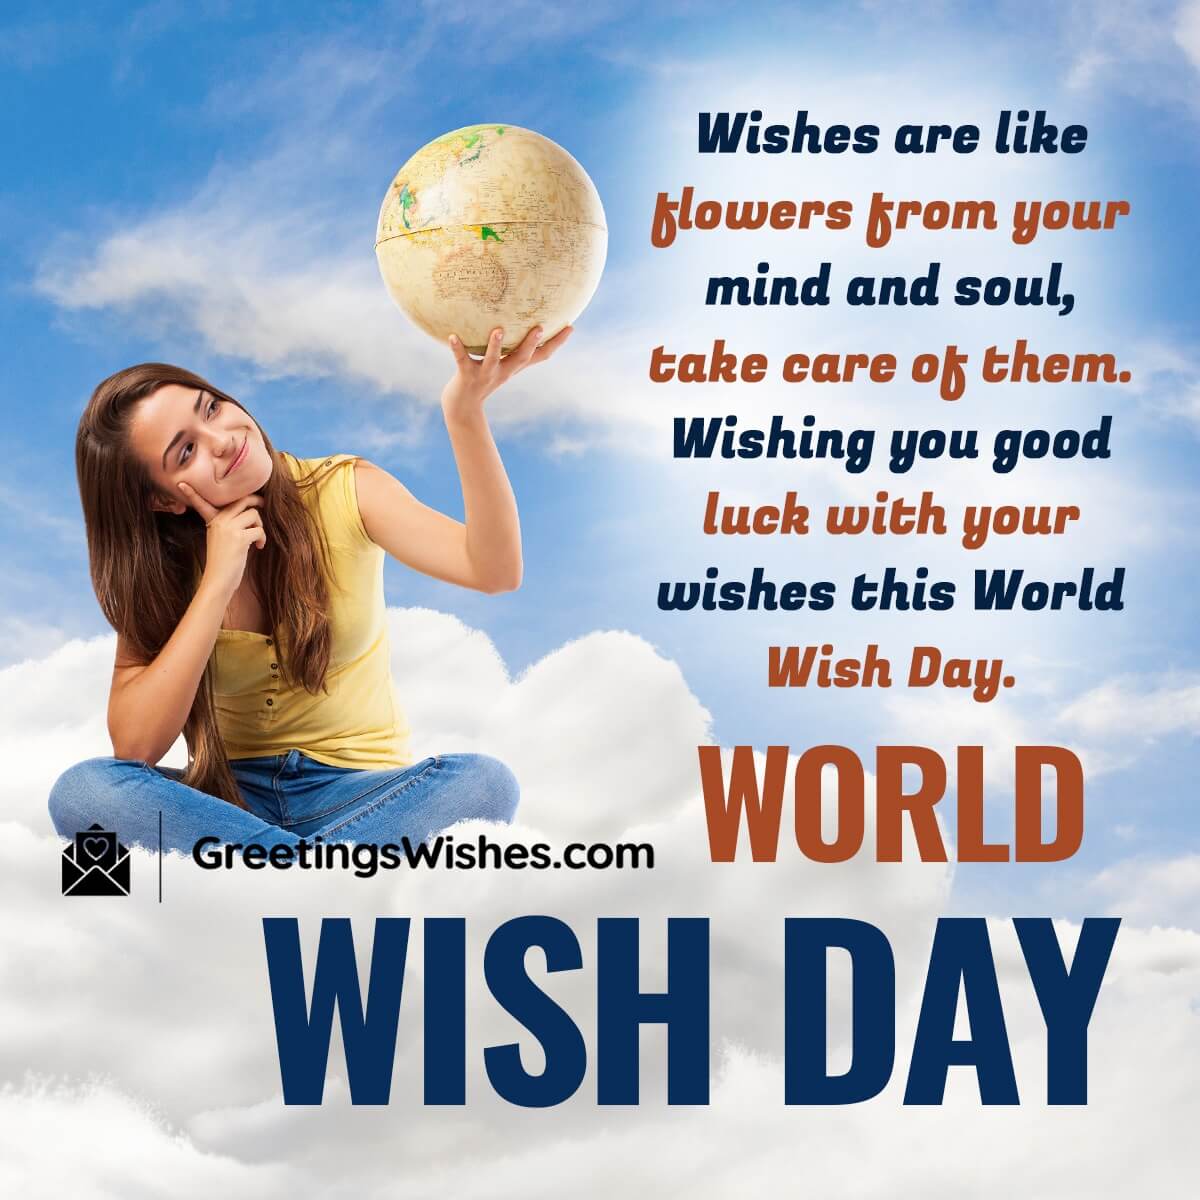 World Wish Day Messages